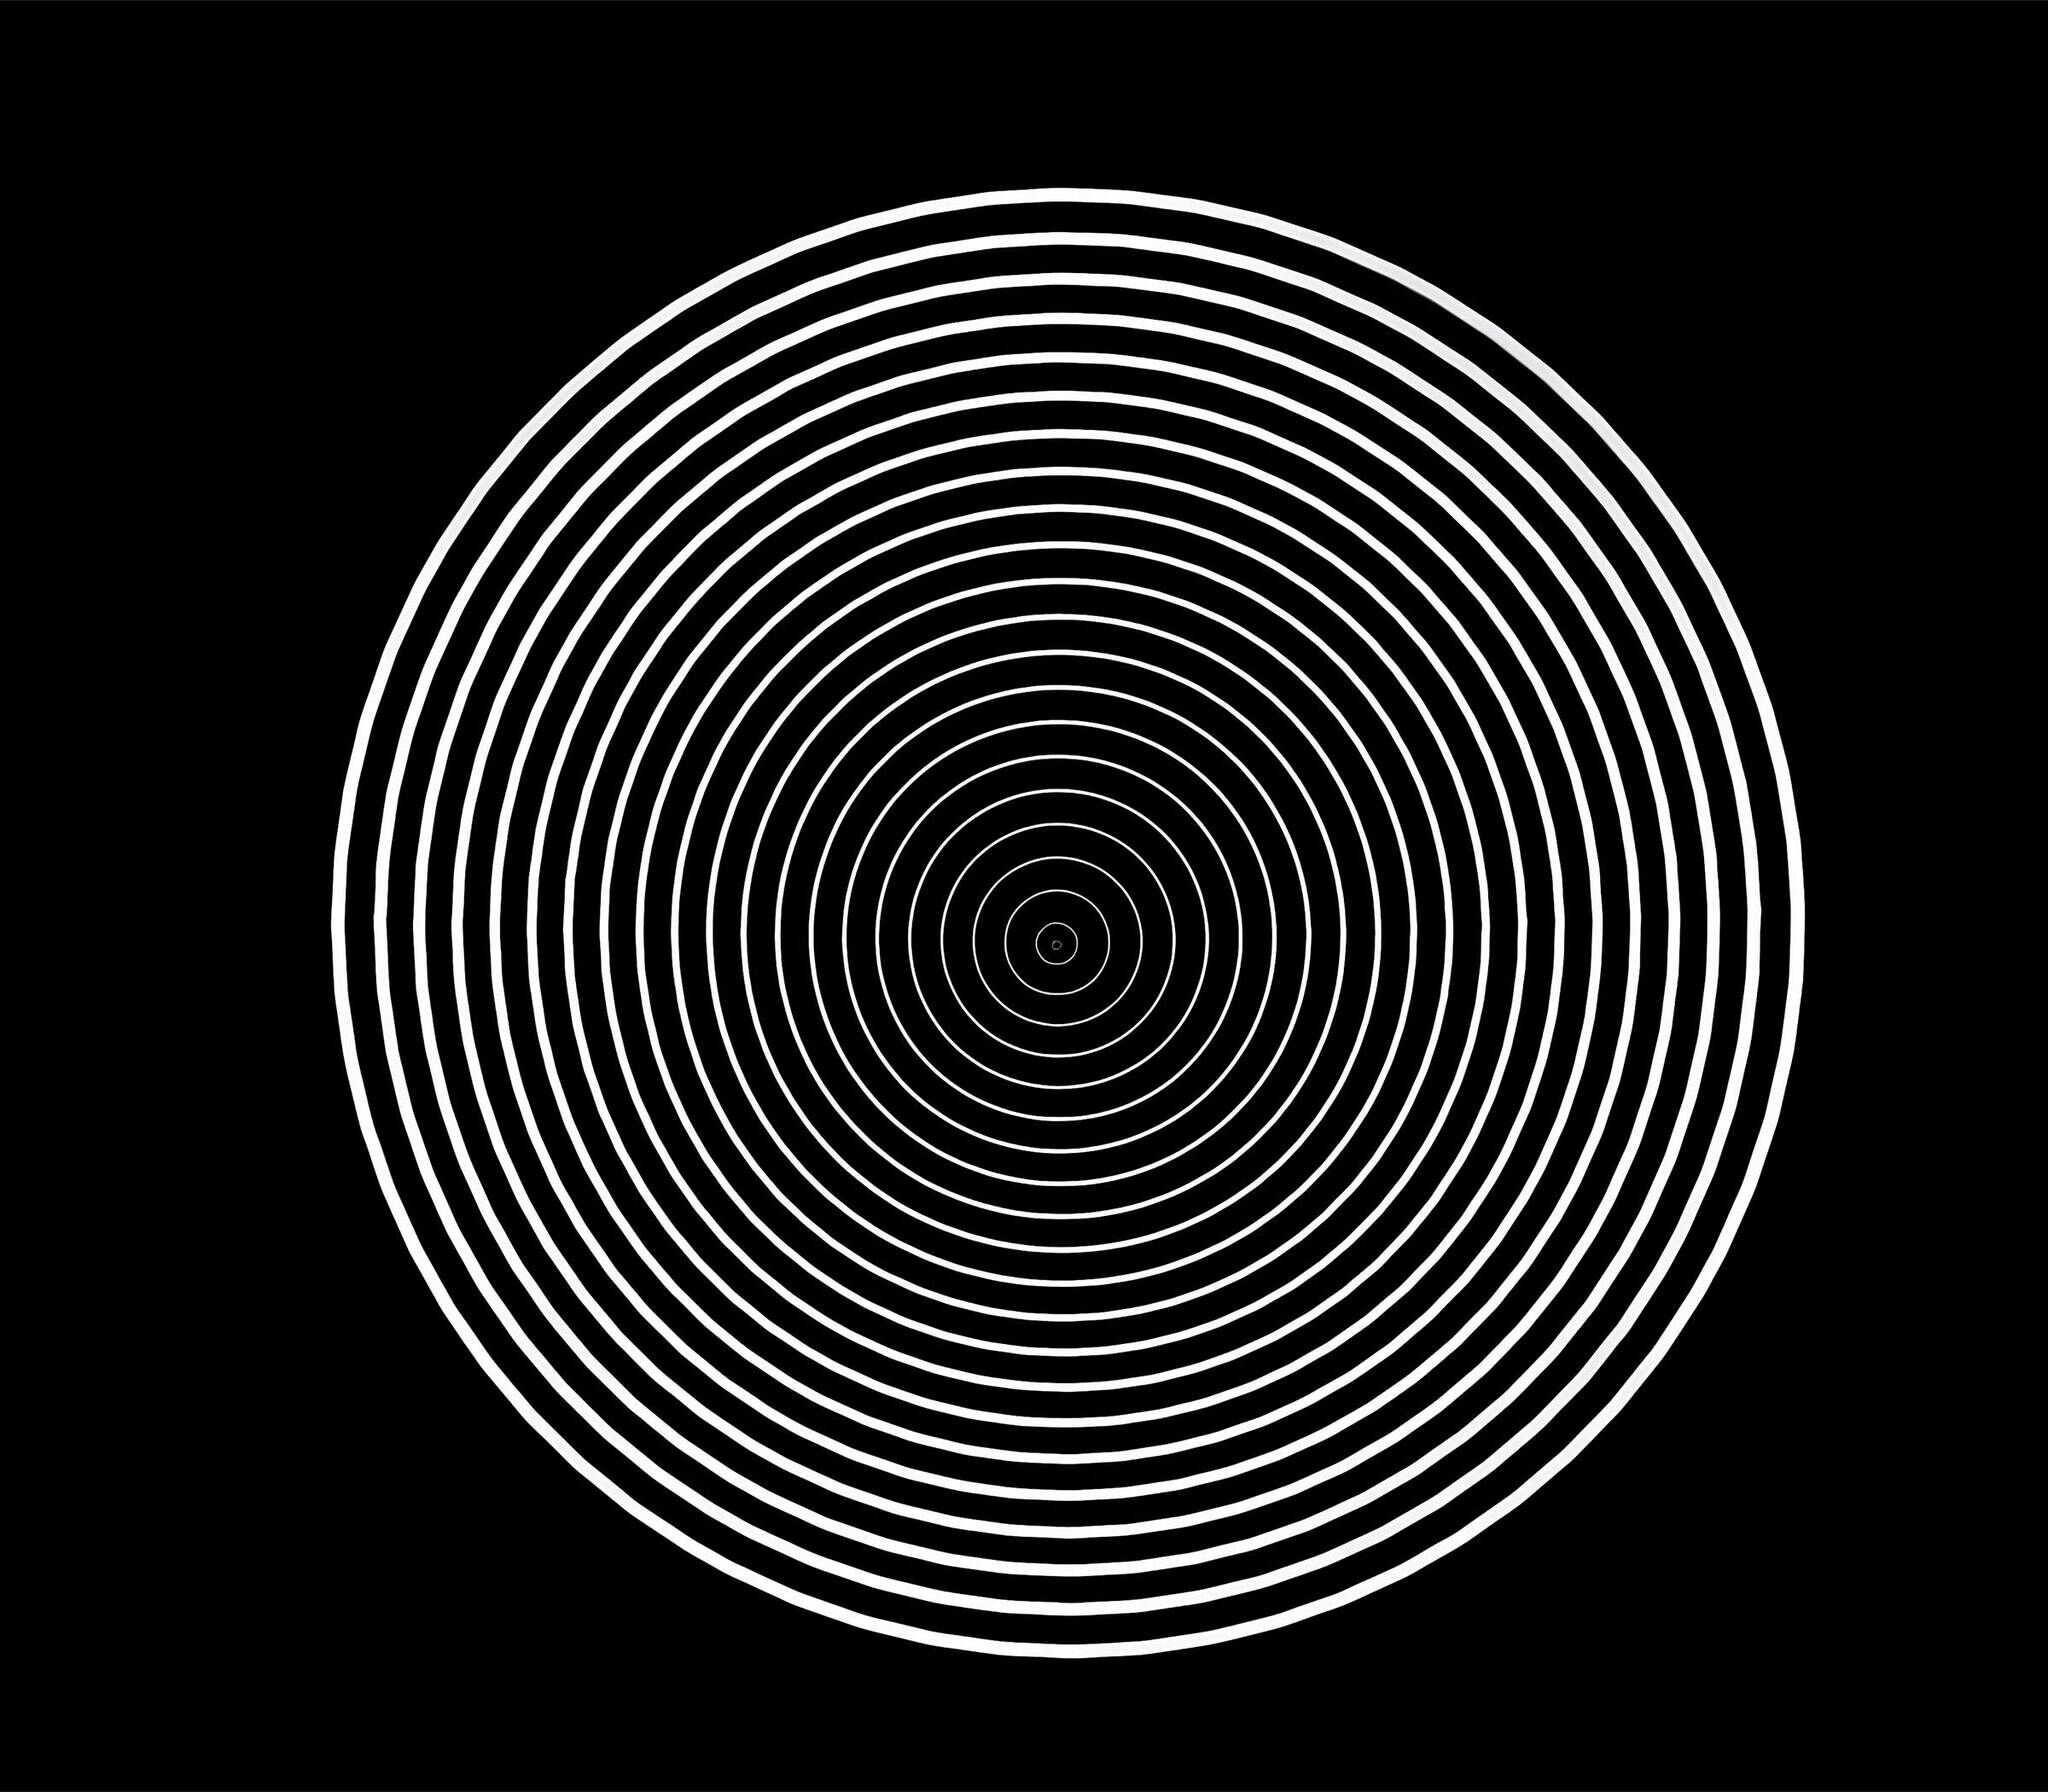 Concentric white circles creating an optical illusion on a black background.